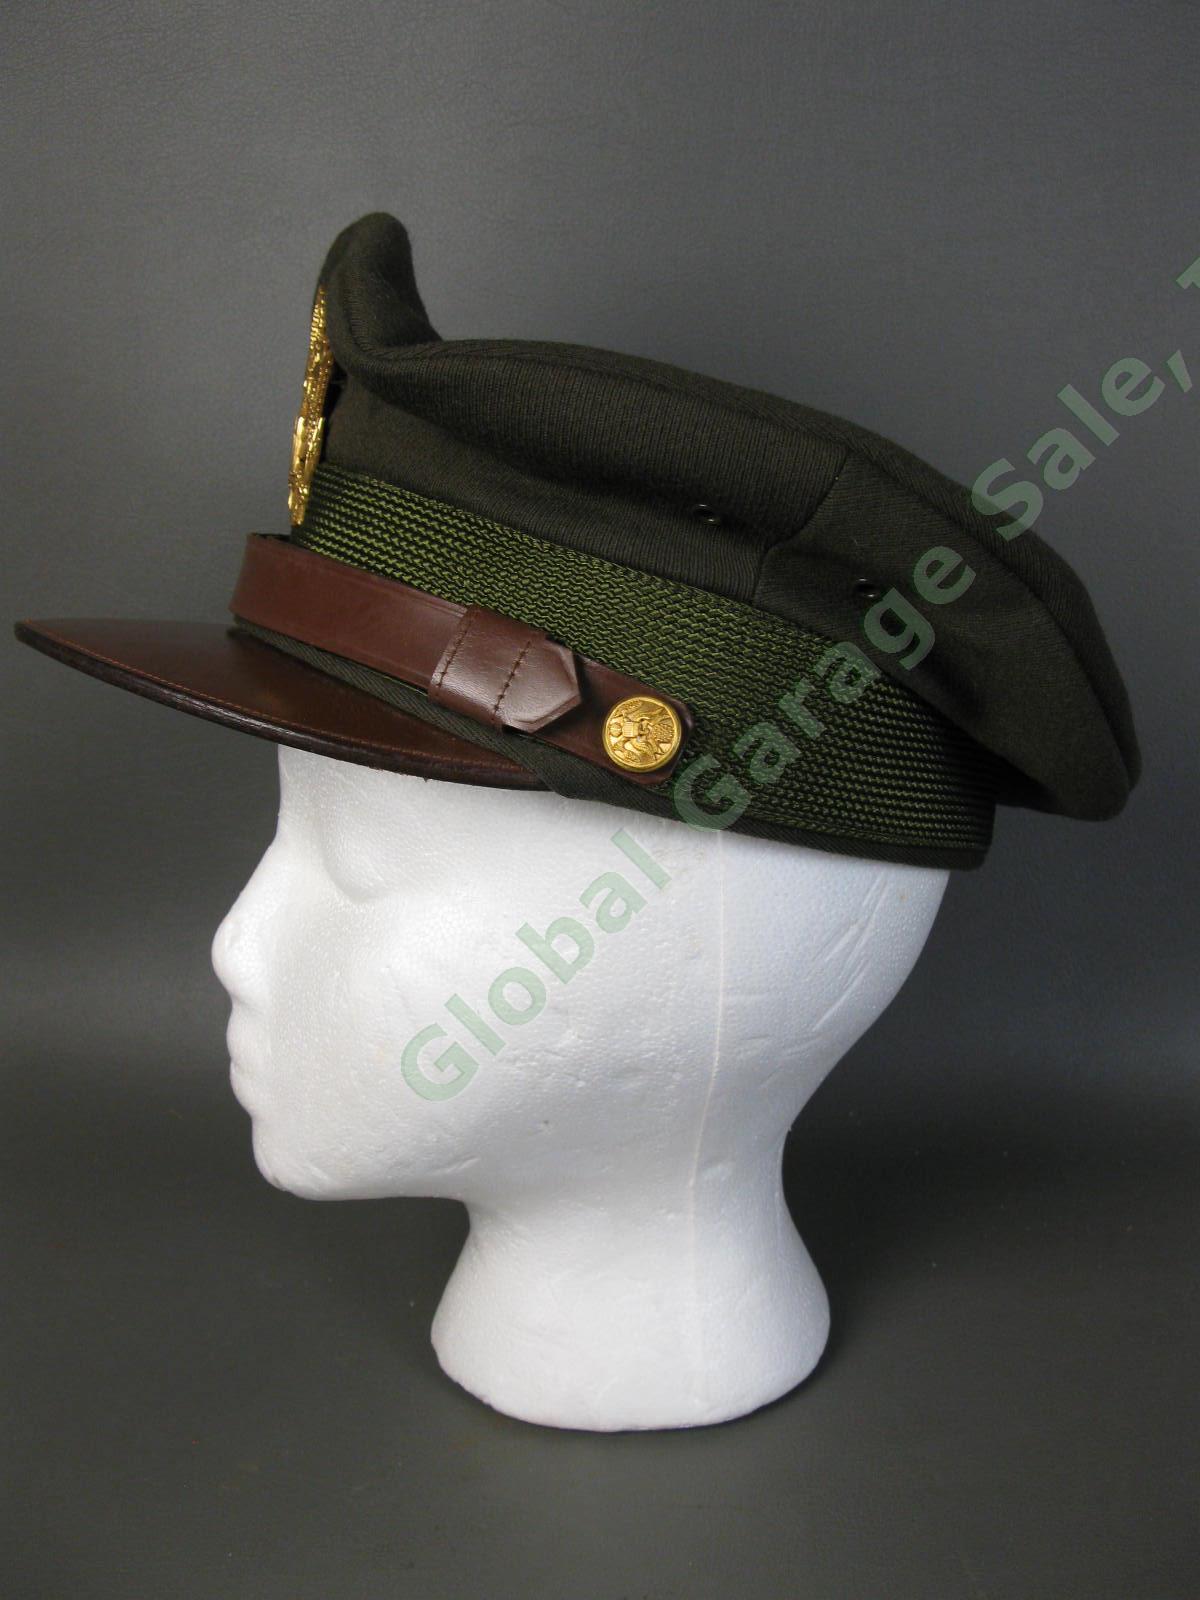 Original WWII 1942 US Army Military Service Officer Wool Olive Drab Dark Cap Hat 1